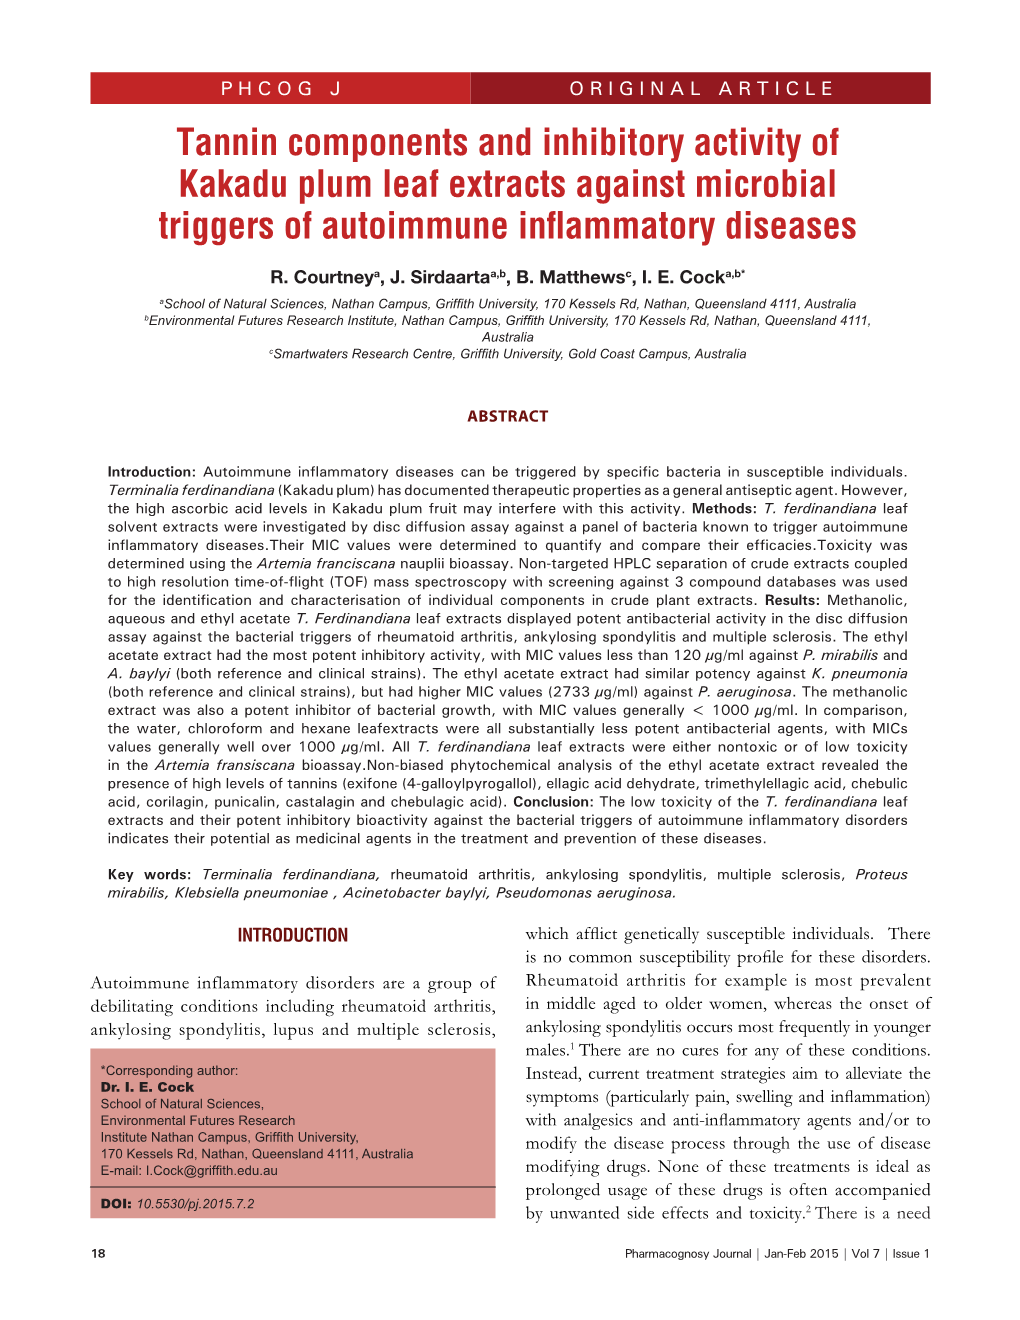 Tannin Components and Inhibitory Activity of Kakadu Plum Leaf Extracts Against Microbial Triggers of Autoimmune Inflammatory Diseases